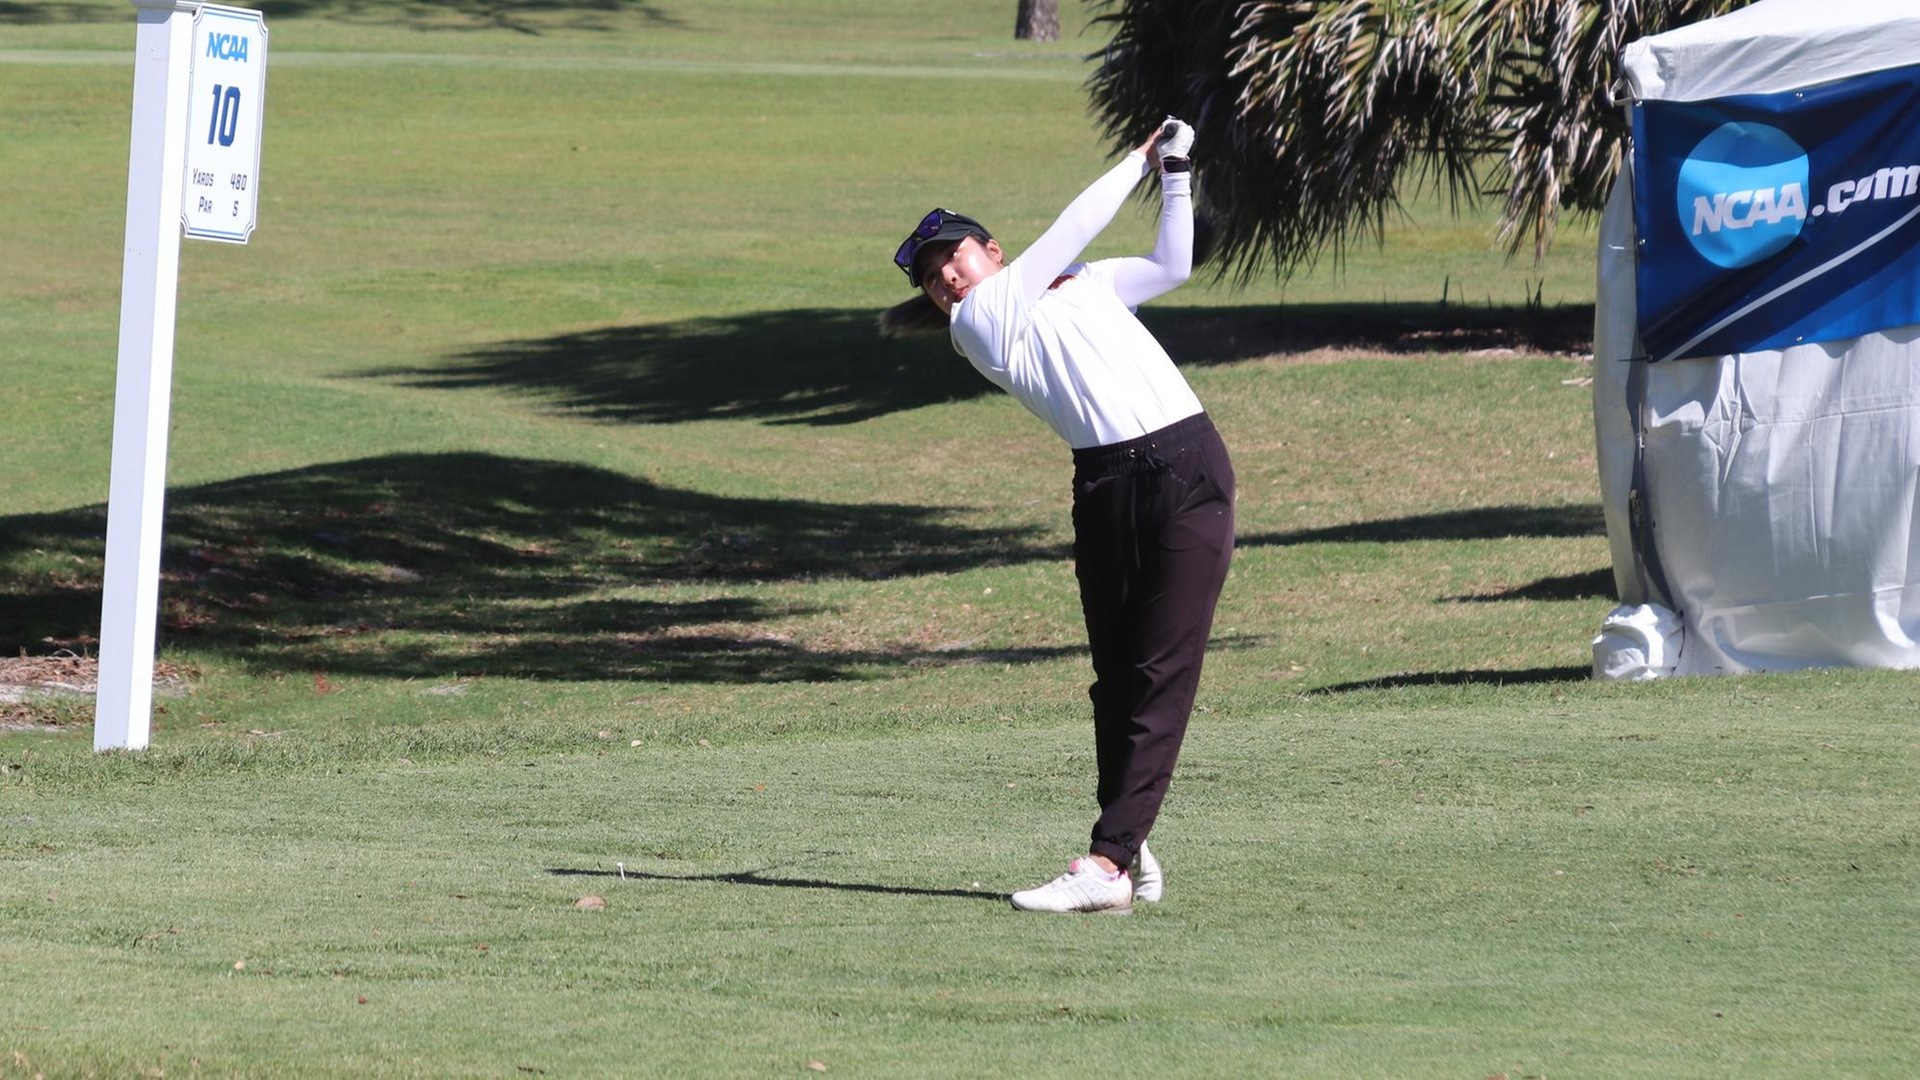 Ella Chiu birdied her 18th hole to tie for the CMS low round (photo courtesy of Oglethorpe)